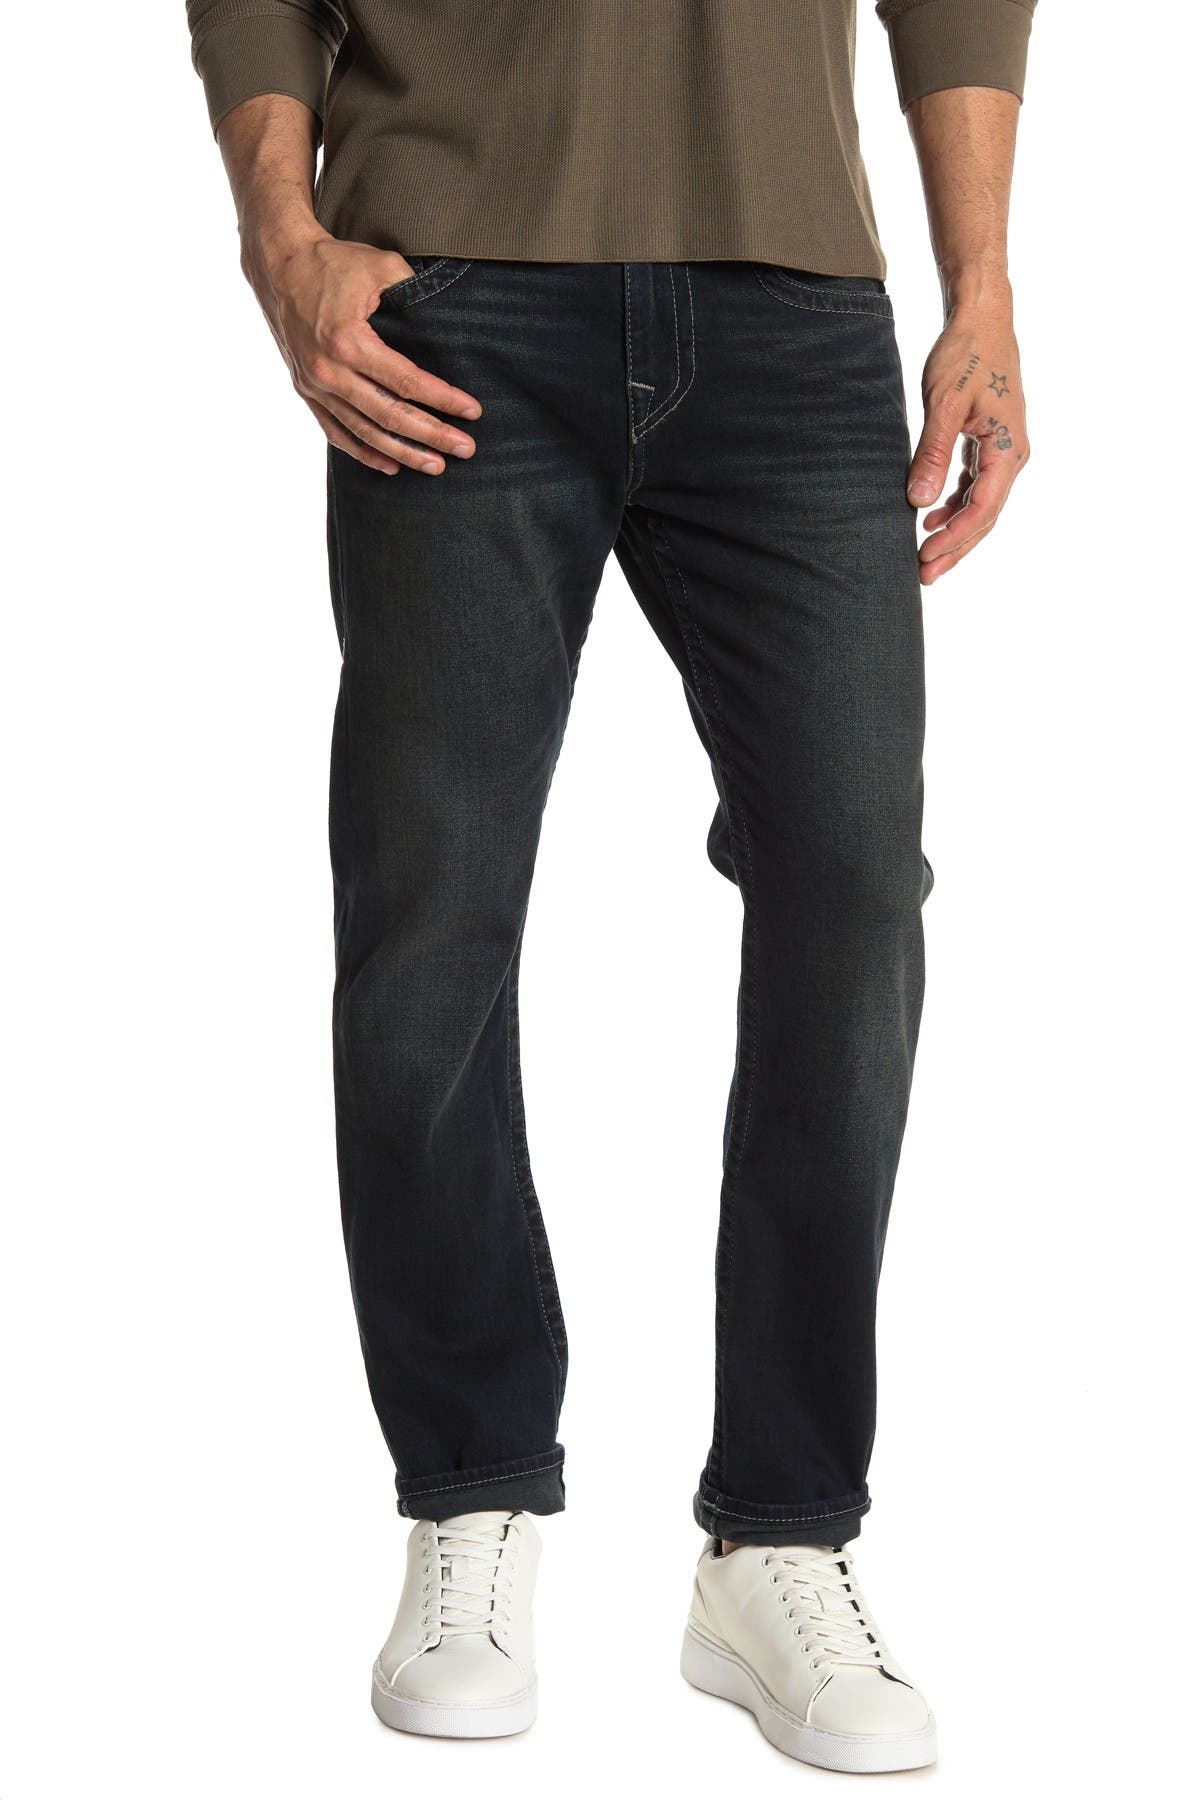 True Religion | Rocco Relaxed Skinny 